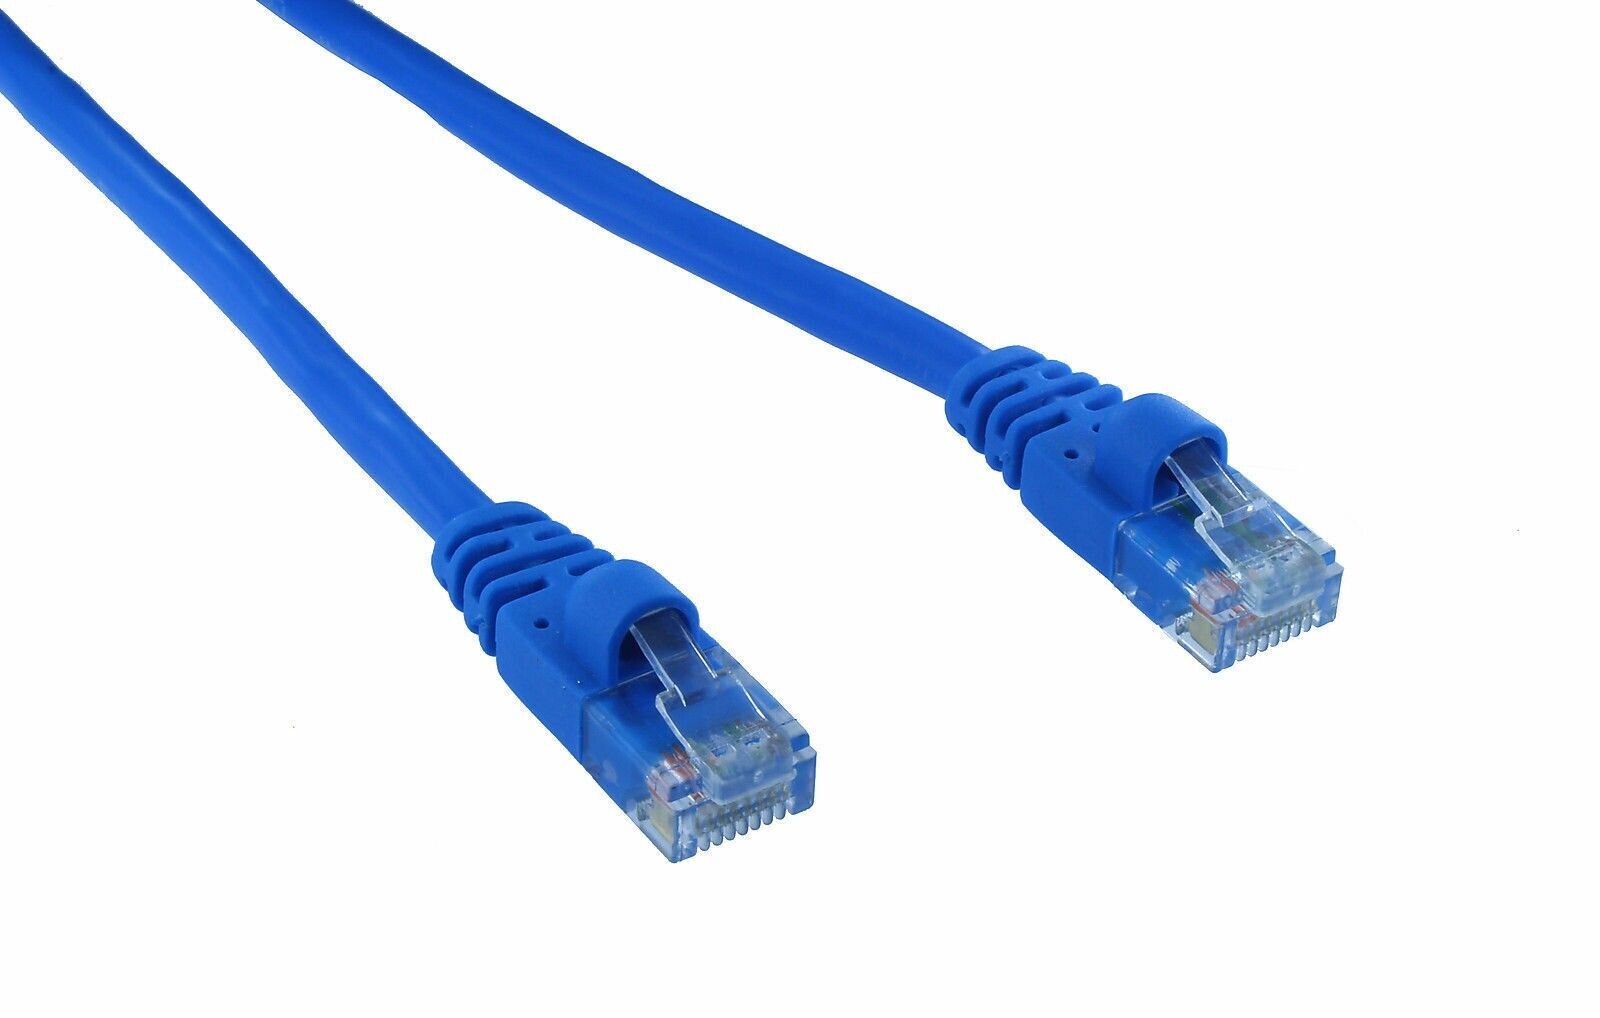 25 ft 25 feet RJ45 CAT5E LAN Network Ethernet Cable Router Switch Buy2 get 1free